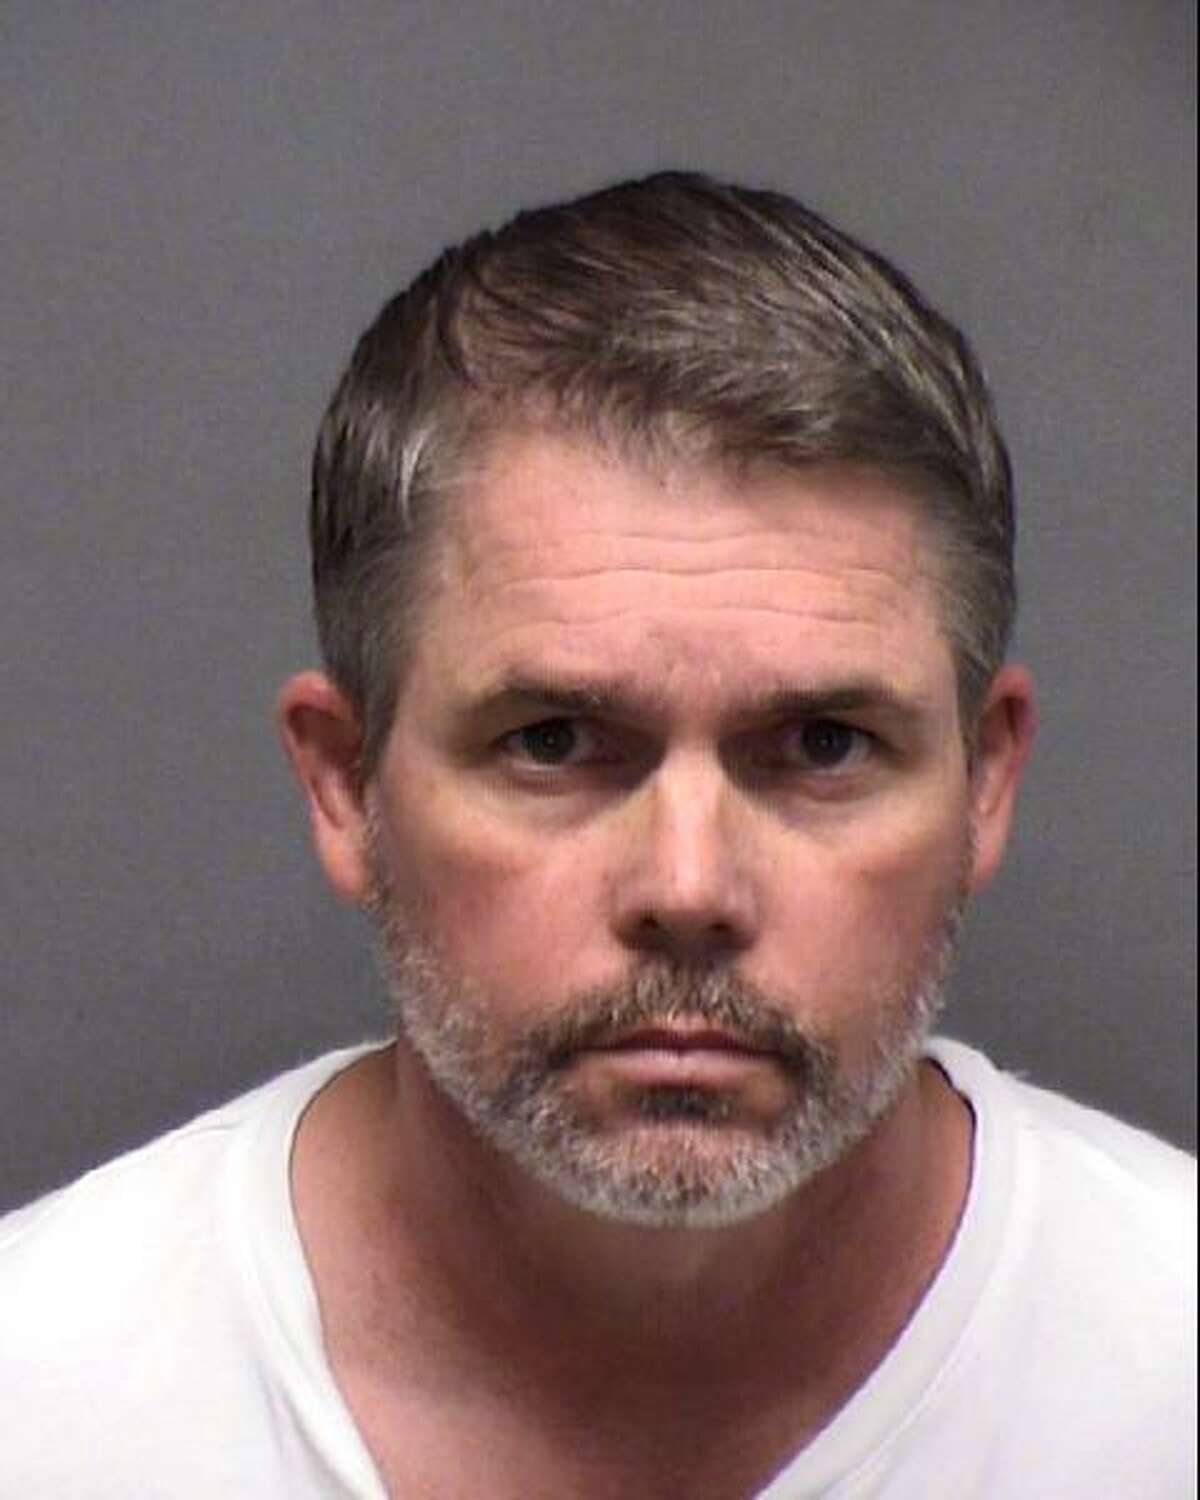 SAPD Sergeant Glenn Michalec, seen in a Sept. 27, 2020, booking photo provided by the Bexar County Sheriff's Department, was arrested about 1:00 a.m. in the 21100 block of Blanco Rd. for DWI, according to an SAPD press release and Bexar County central magistrate records. The 29 year member of the department was booked at the central magistrate office about 8:00 a.m. He appeared before a magistrate at 11:30 a.m. and was related 10 minutes later on an $800 bail, according to central magistrate records. He will be placed on administrative leave while he waits for the outcome of his criminal and administrative investigations, according to the press release.